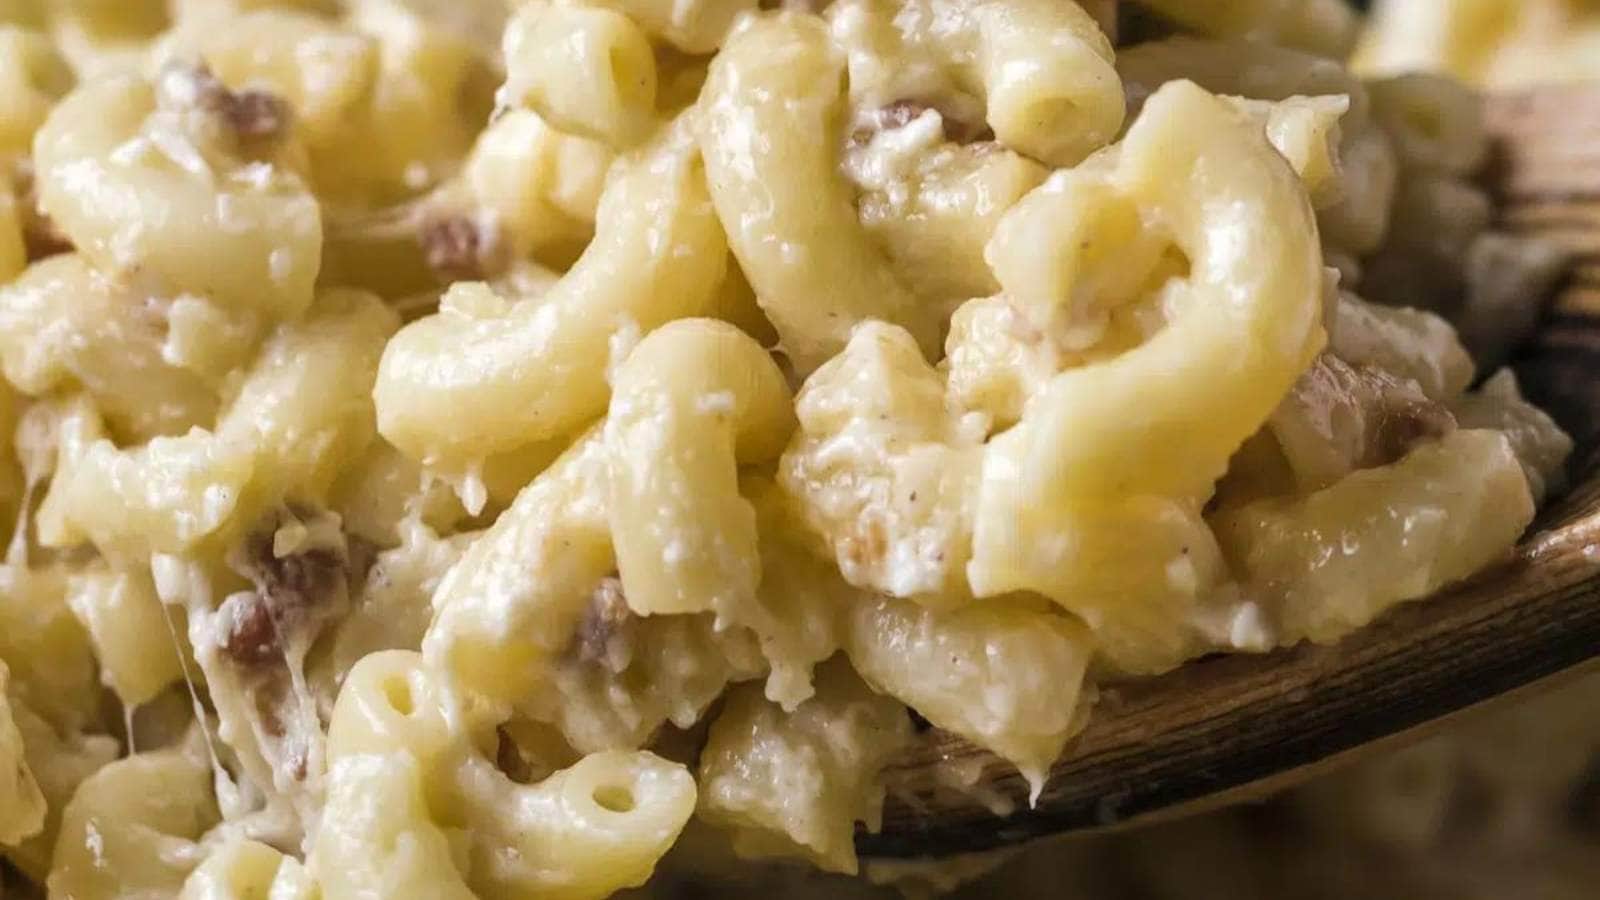 Slow Cooker Jalapeno Mac and Cheese recipe by The Magical Slow Cooker.
